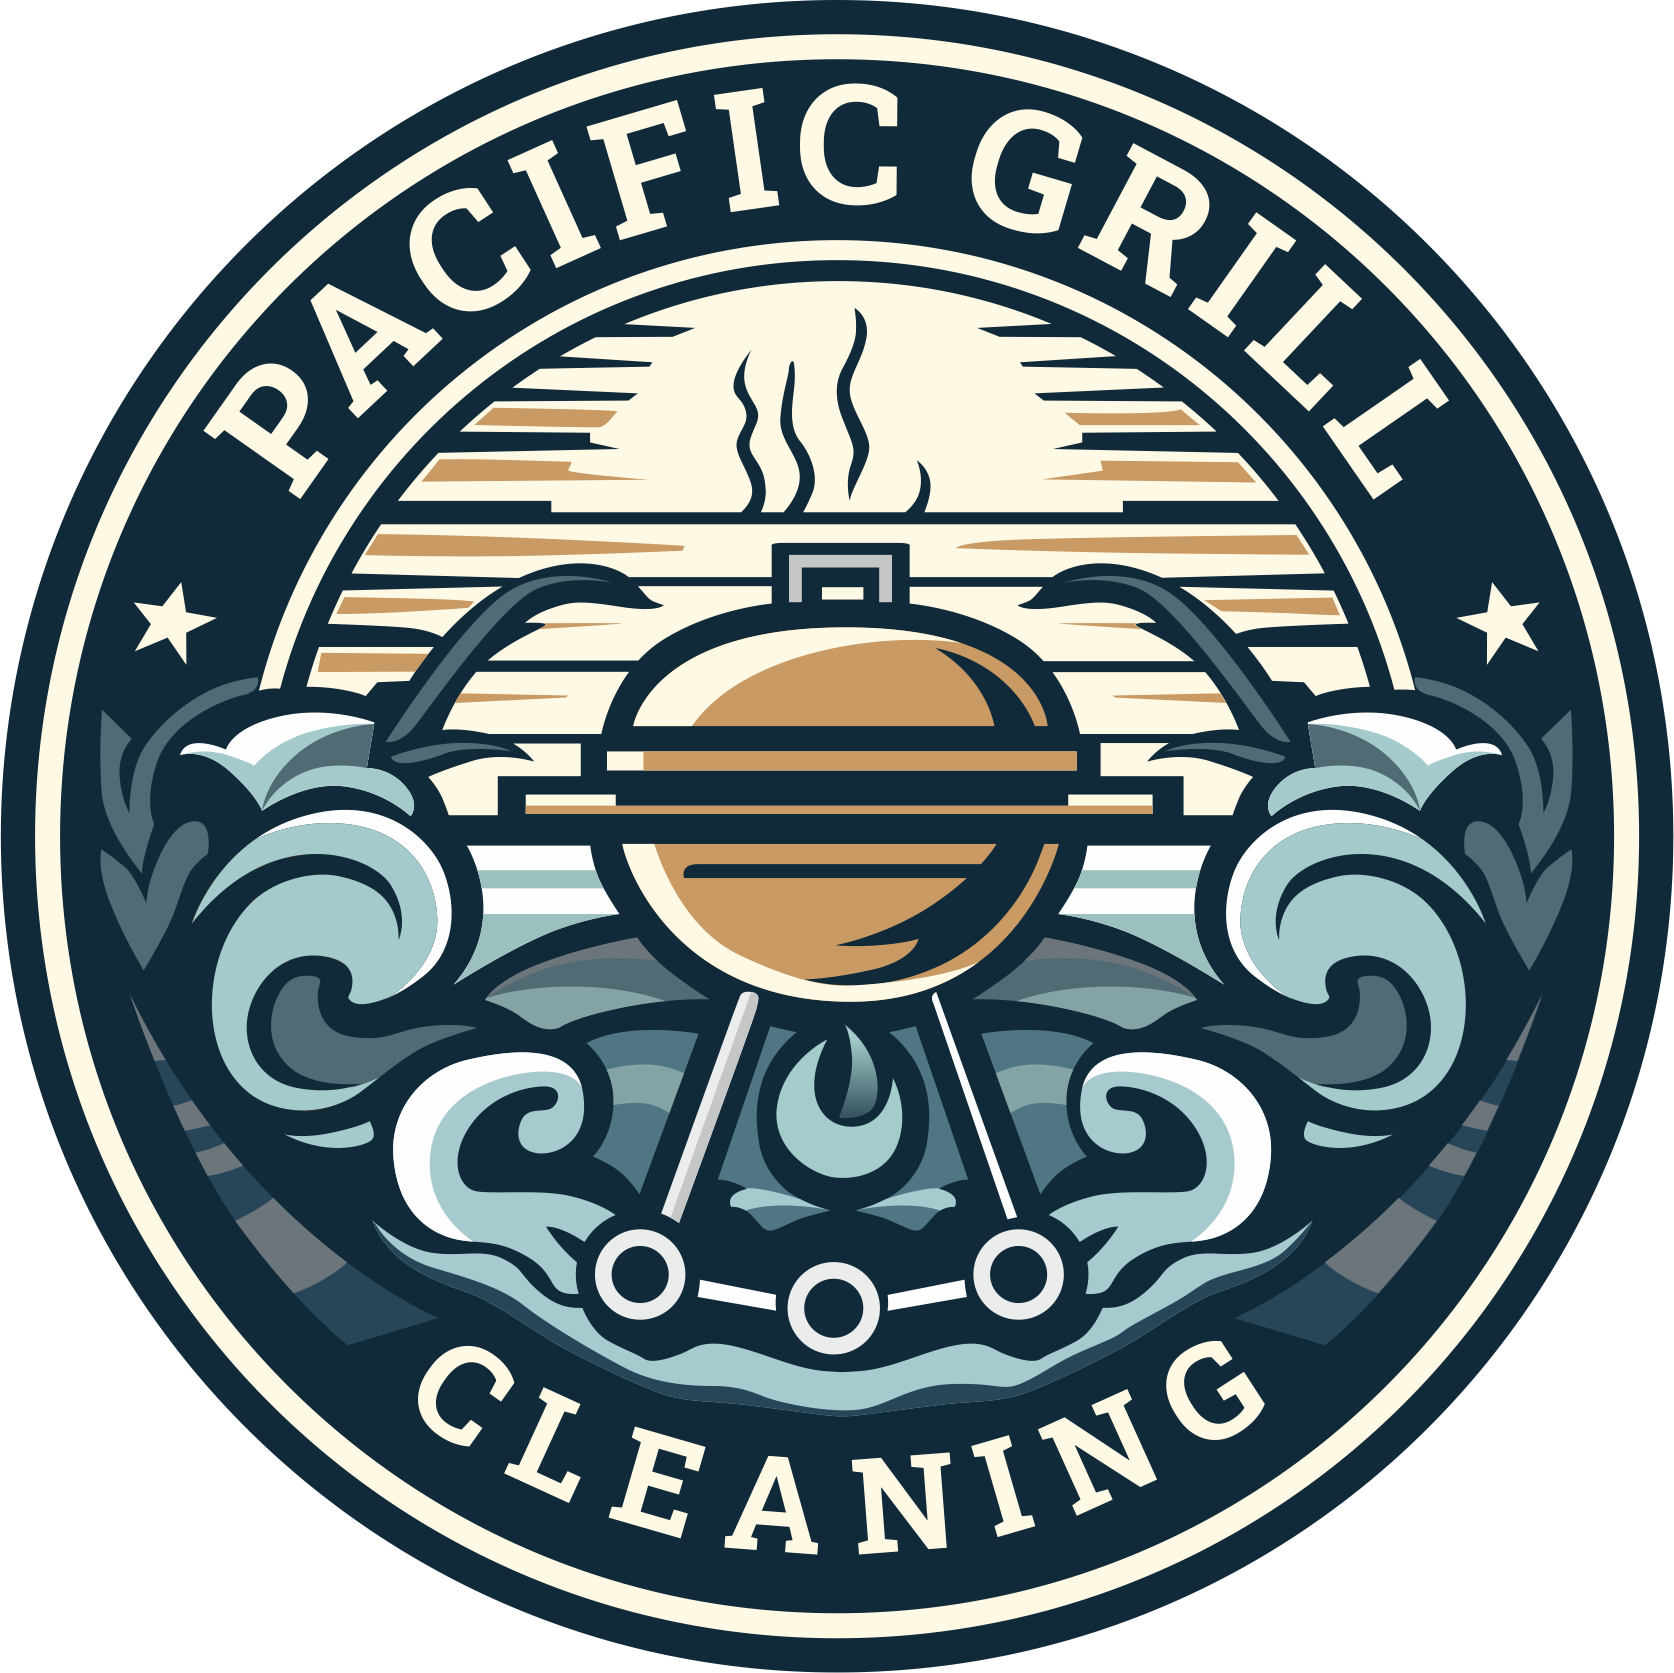 Pacific Grill Cleaning. Serving all of south california